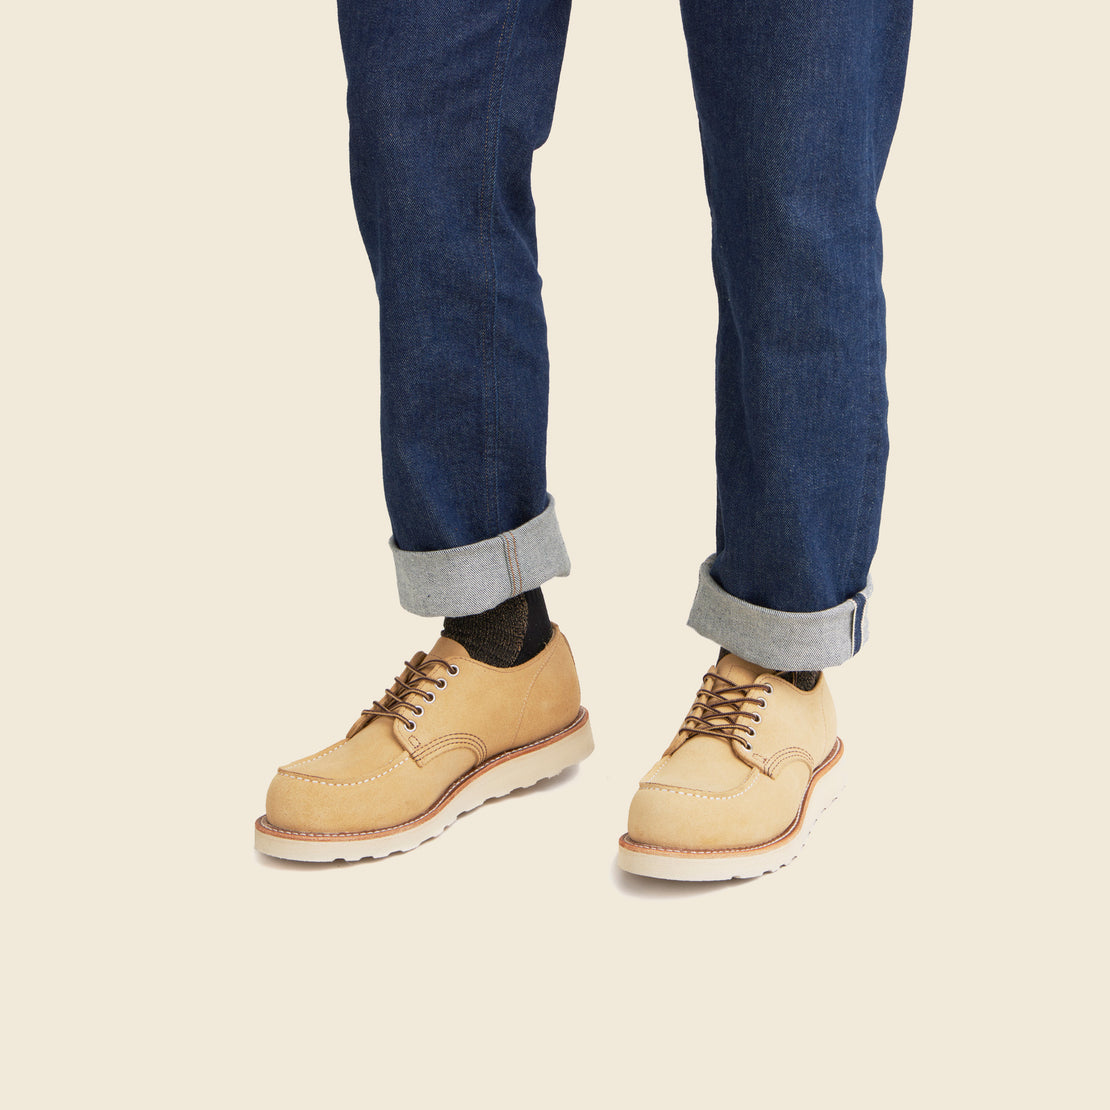 Shop Moc Oxford No. 8079 - Hawthorne Abilene - Red Wing - STAG Provisions - Shoes - Boots / Chukkas